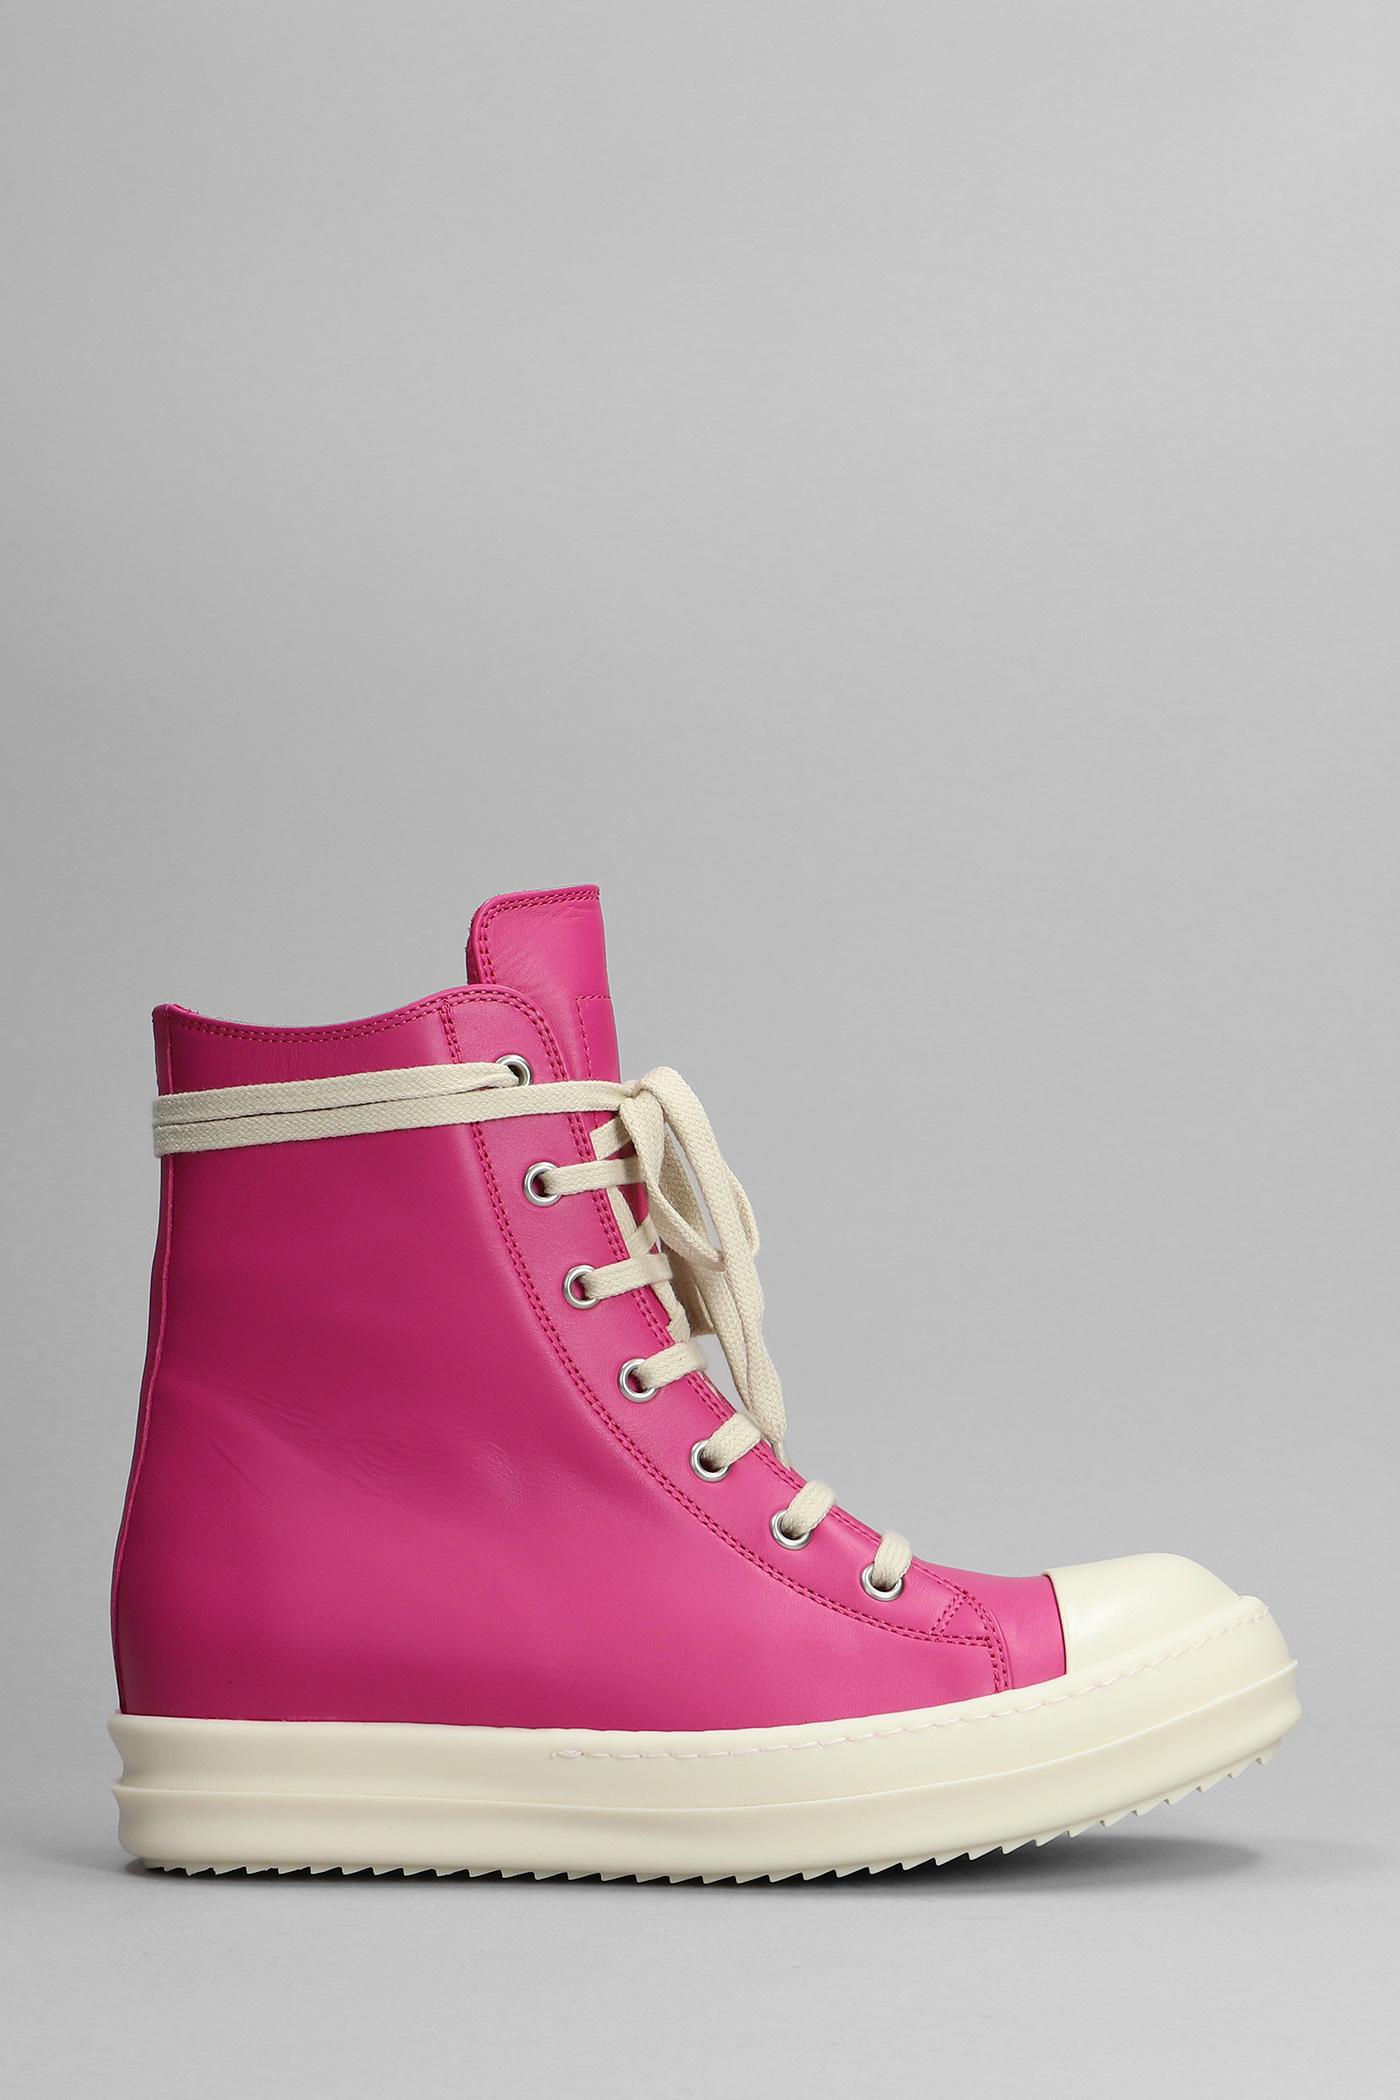 Rick Owens Leather High-top Sneakers in Pink | Lyst